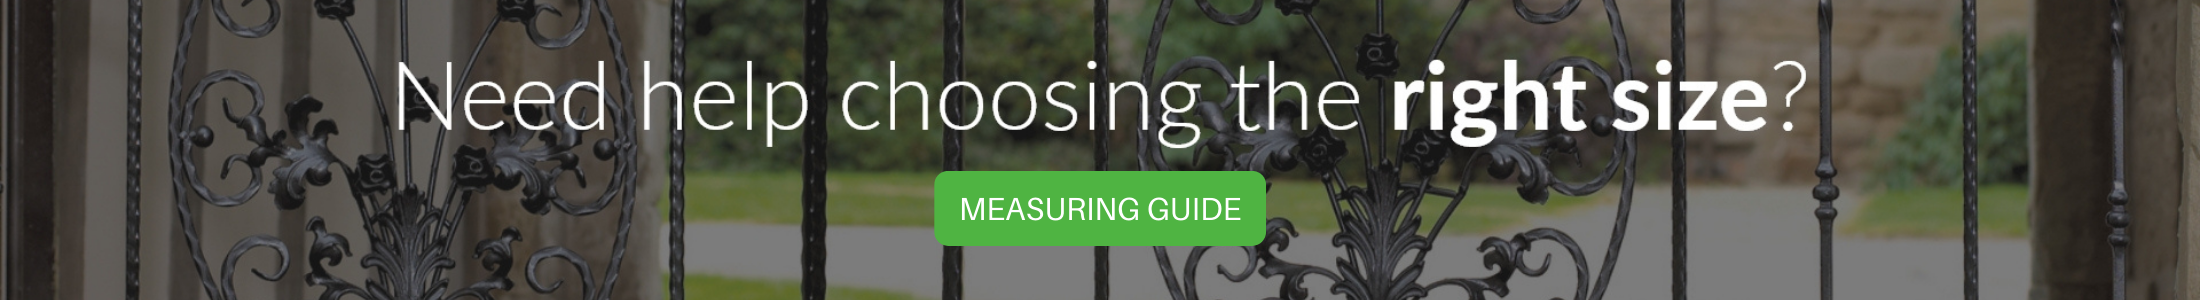 Take a look at the full measuring guide in more detail